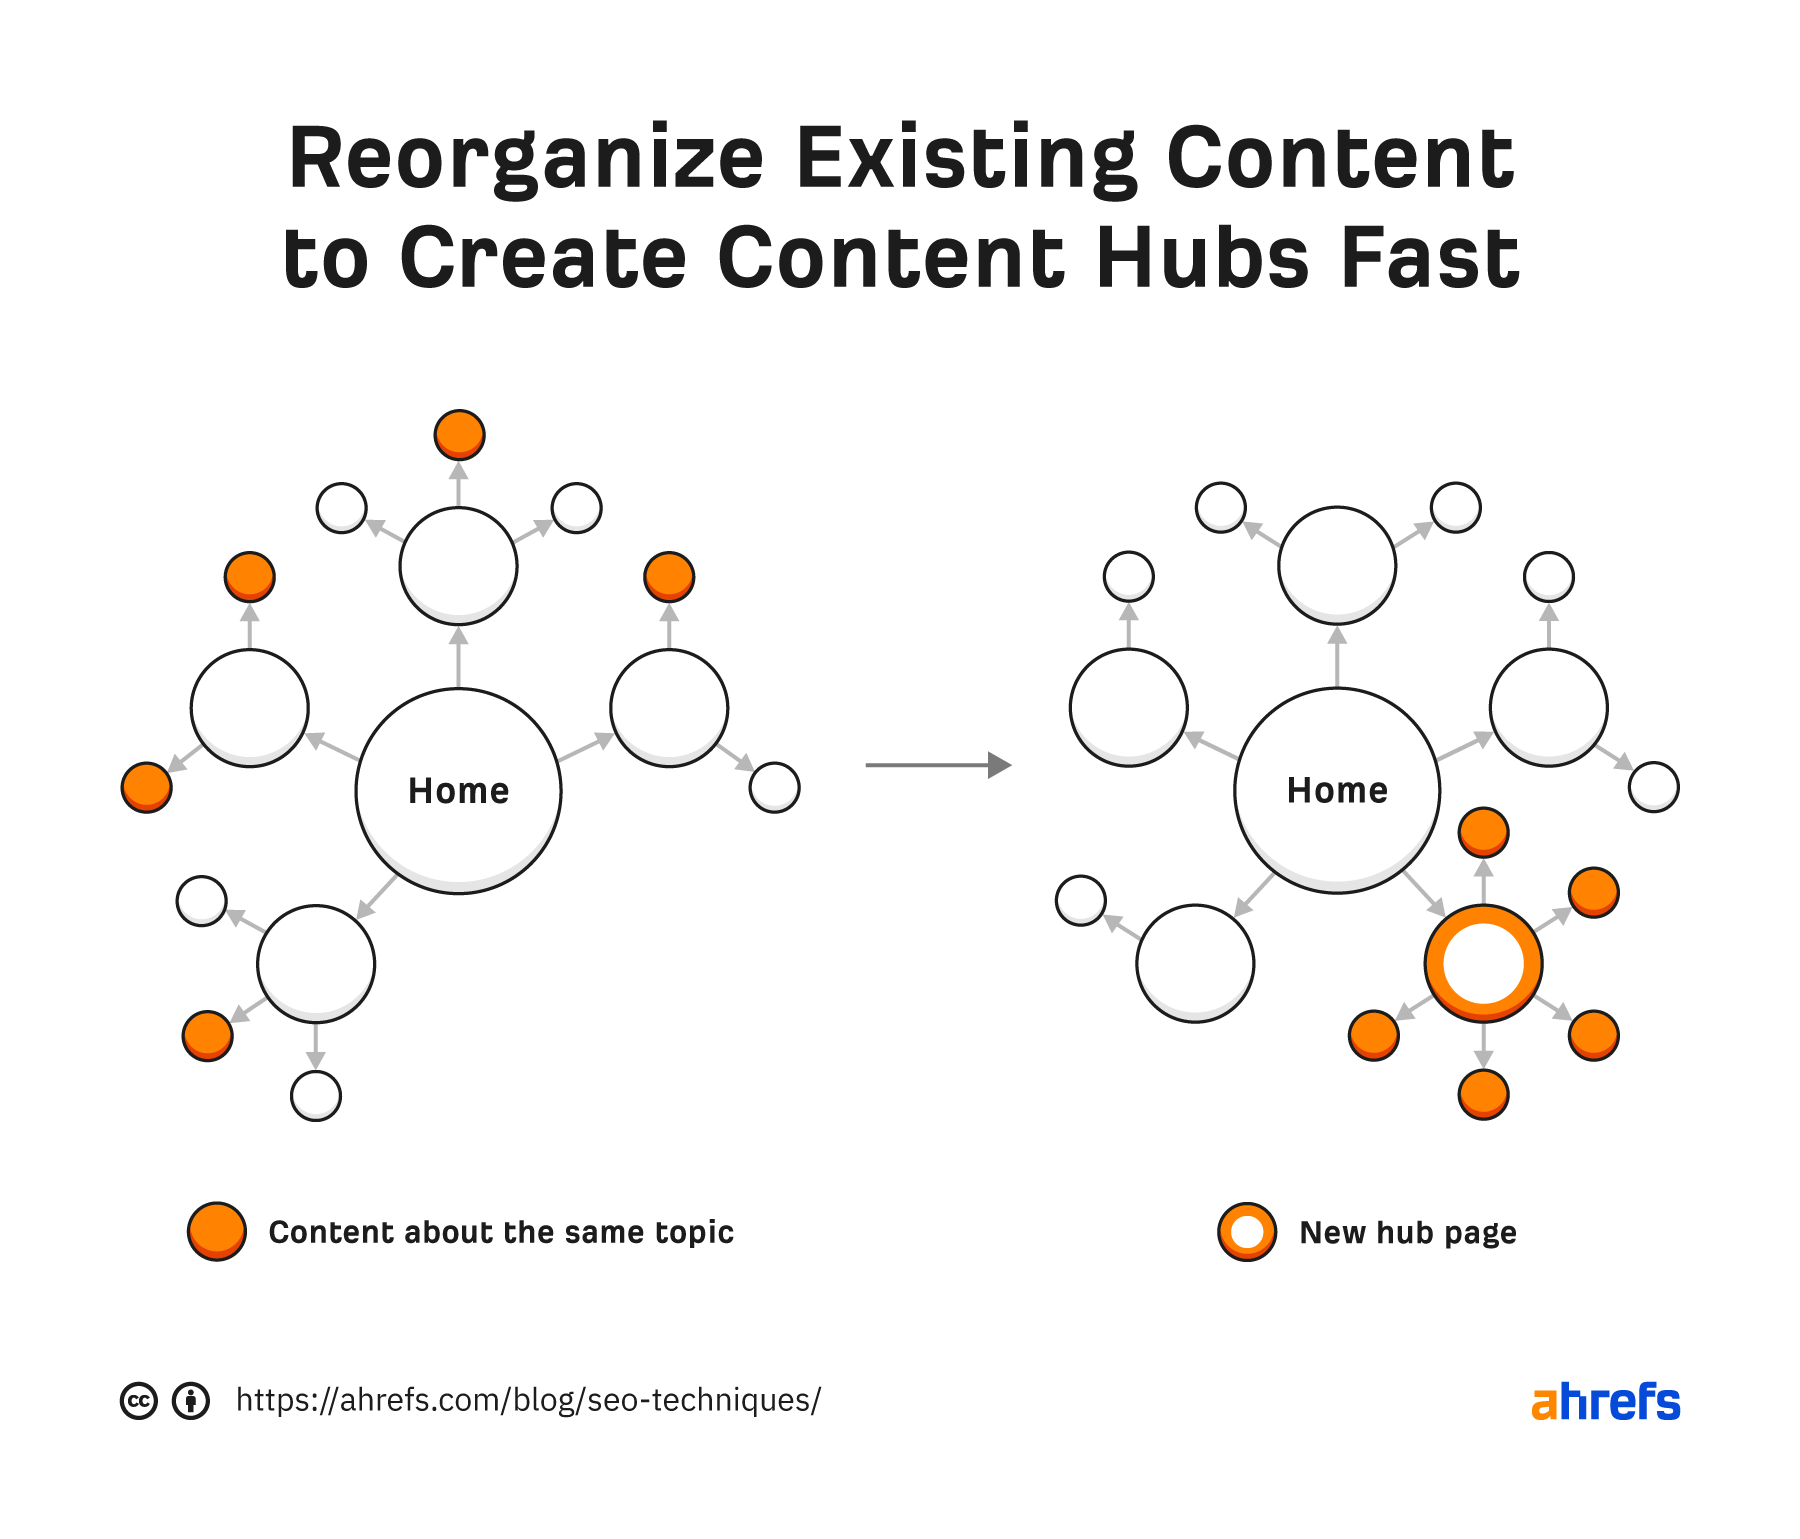 Flowchart showing how existing content can be reorganized